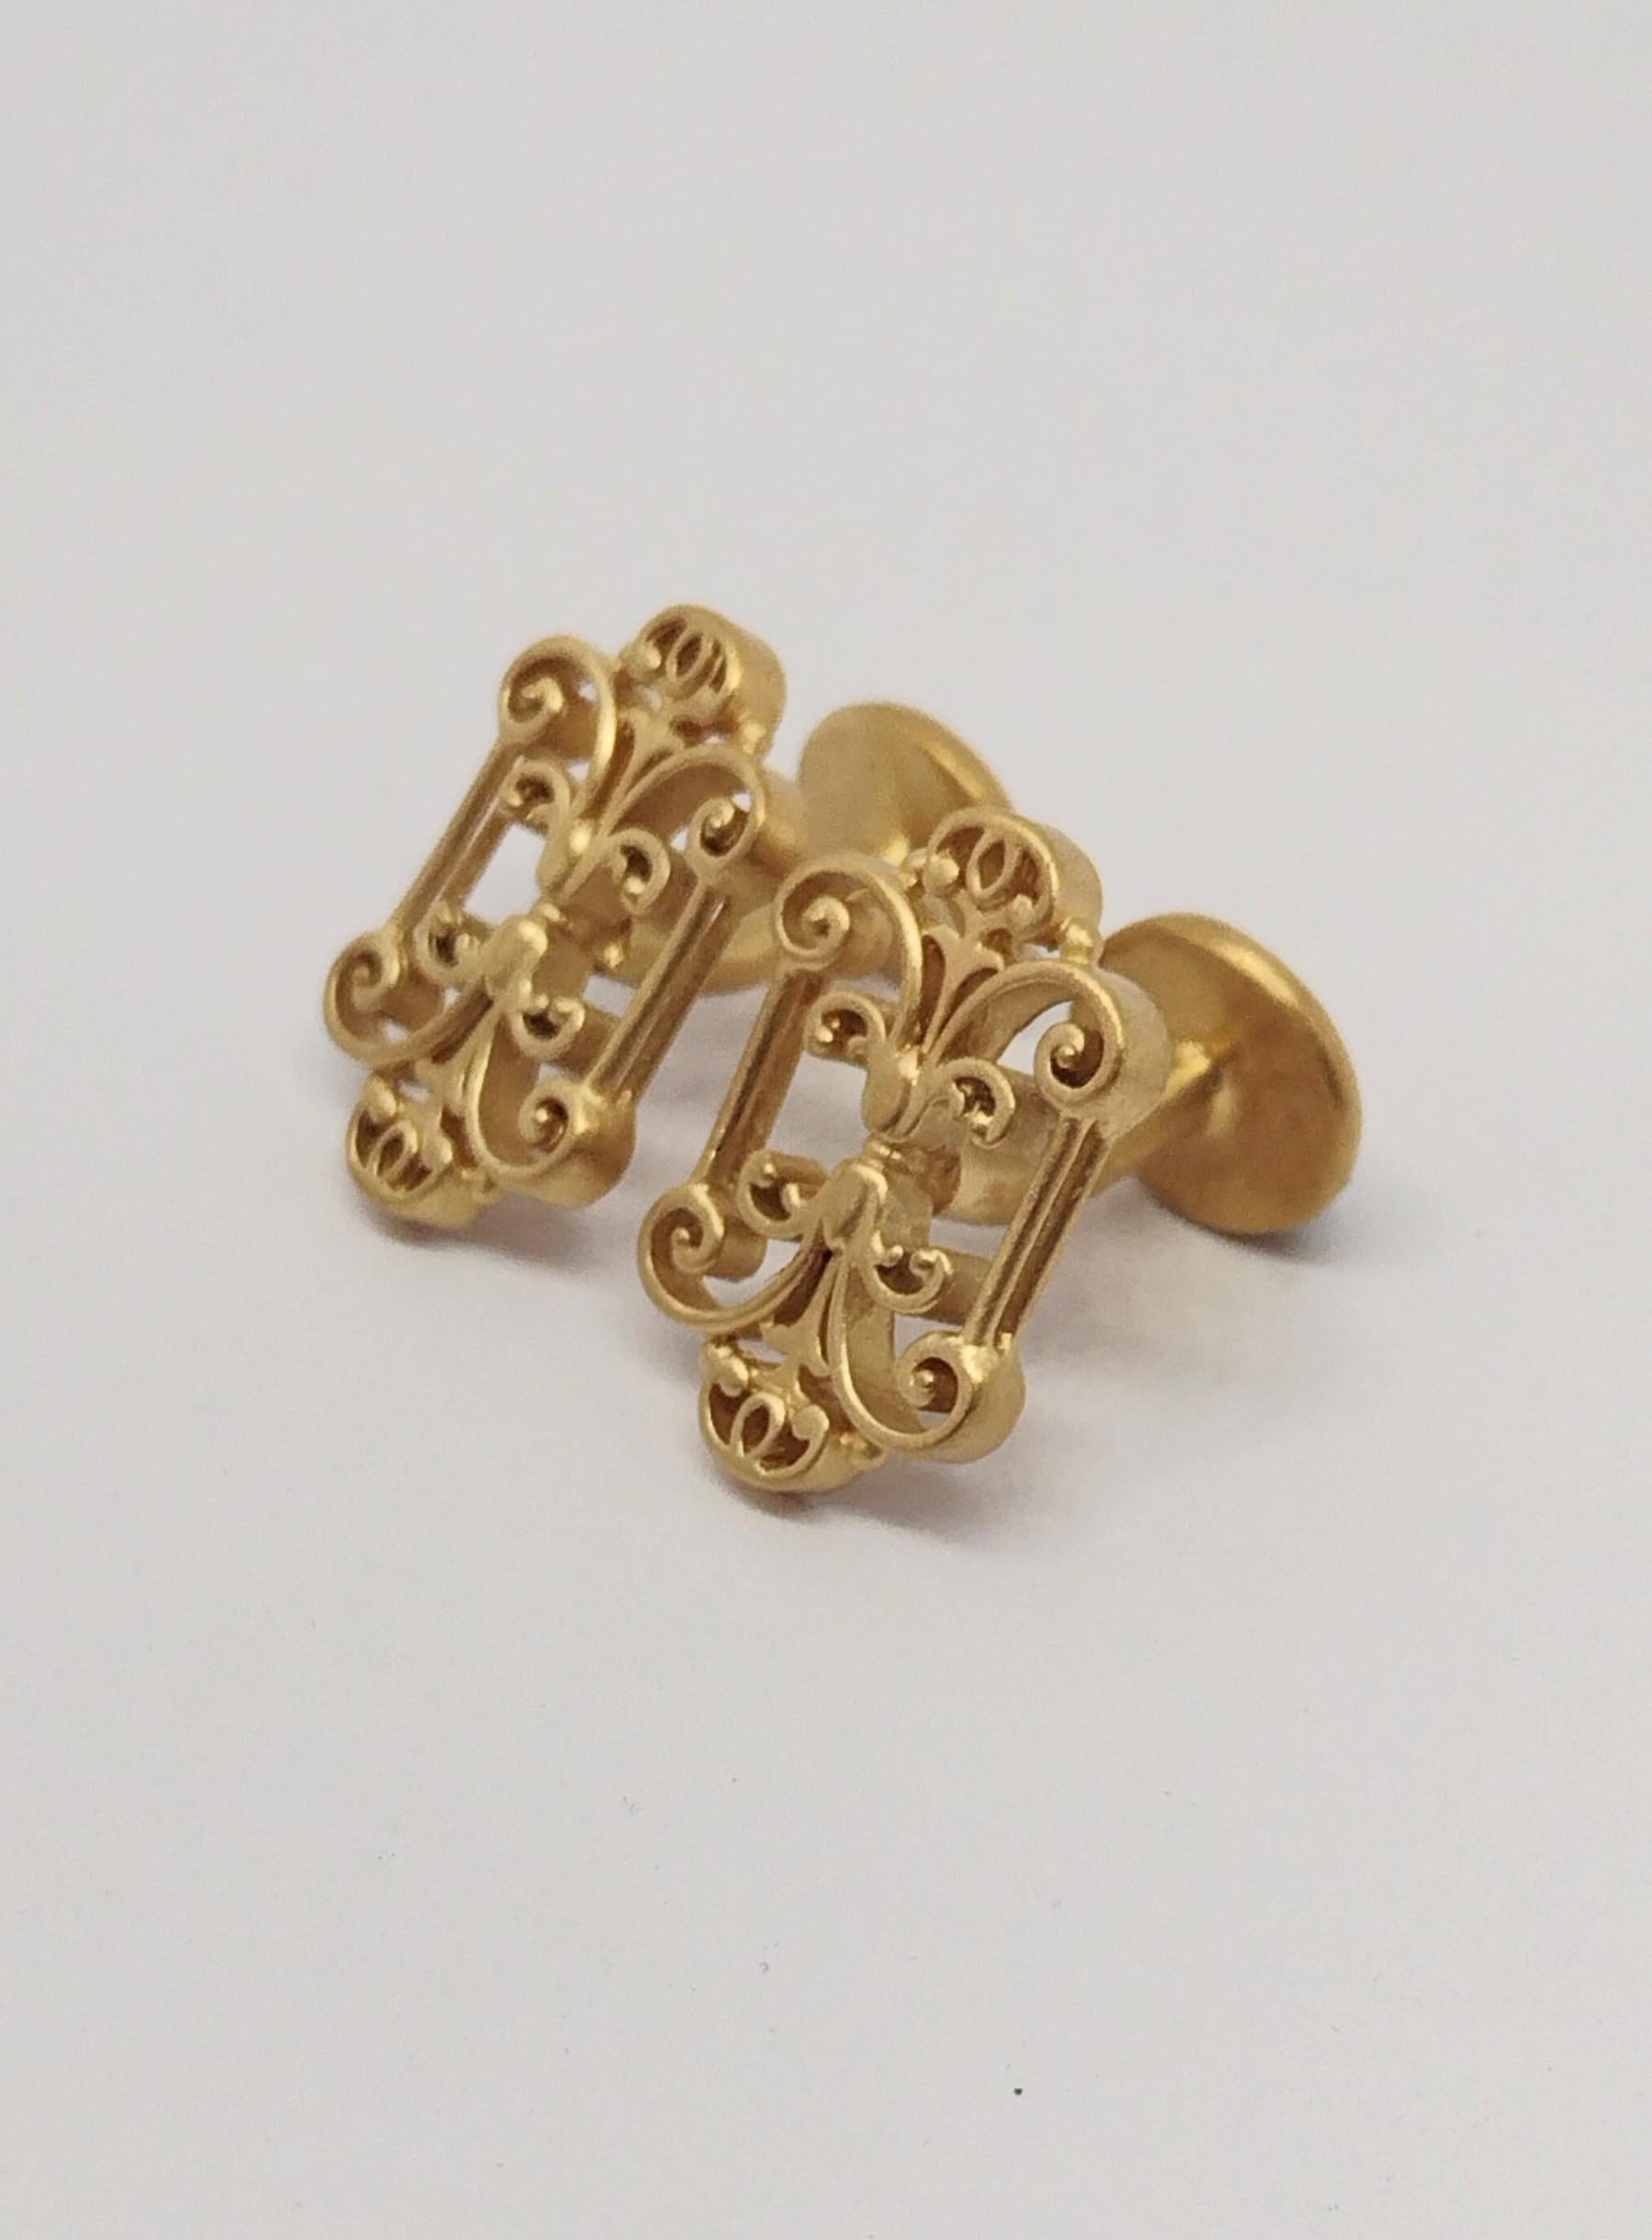 14 Karat Yellow Gold French Gate Cufflinks , This is a series for cufflinks from my travels. Photographs of iron and bronze gates, fences,and windows. The lost art of decorative hand wrought metal work. These are matte and polished  22 mm x 14 x 3